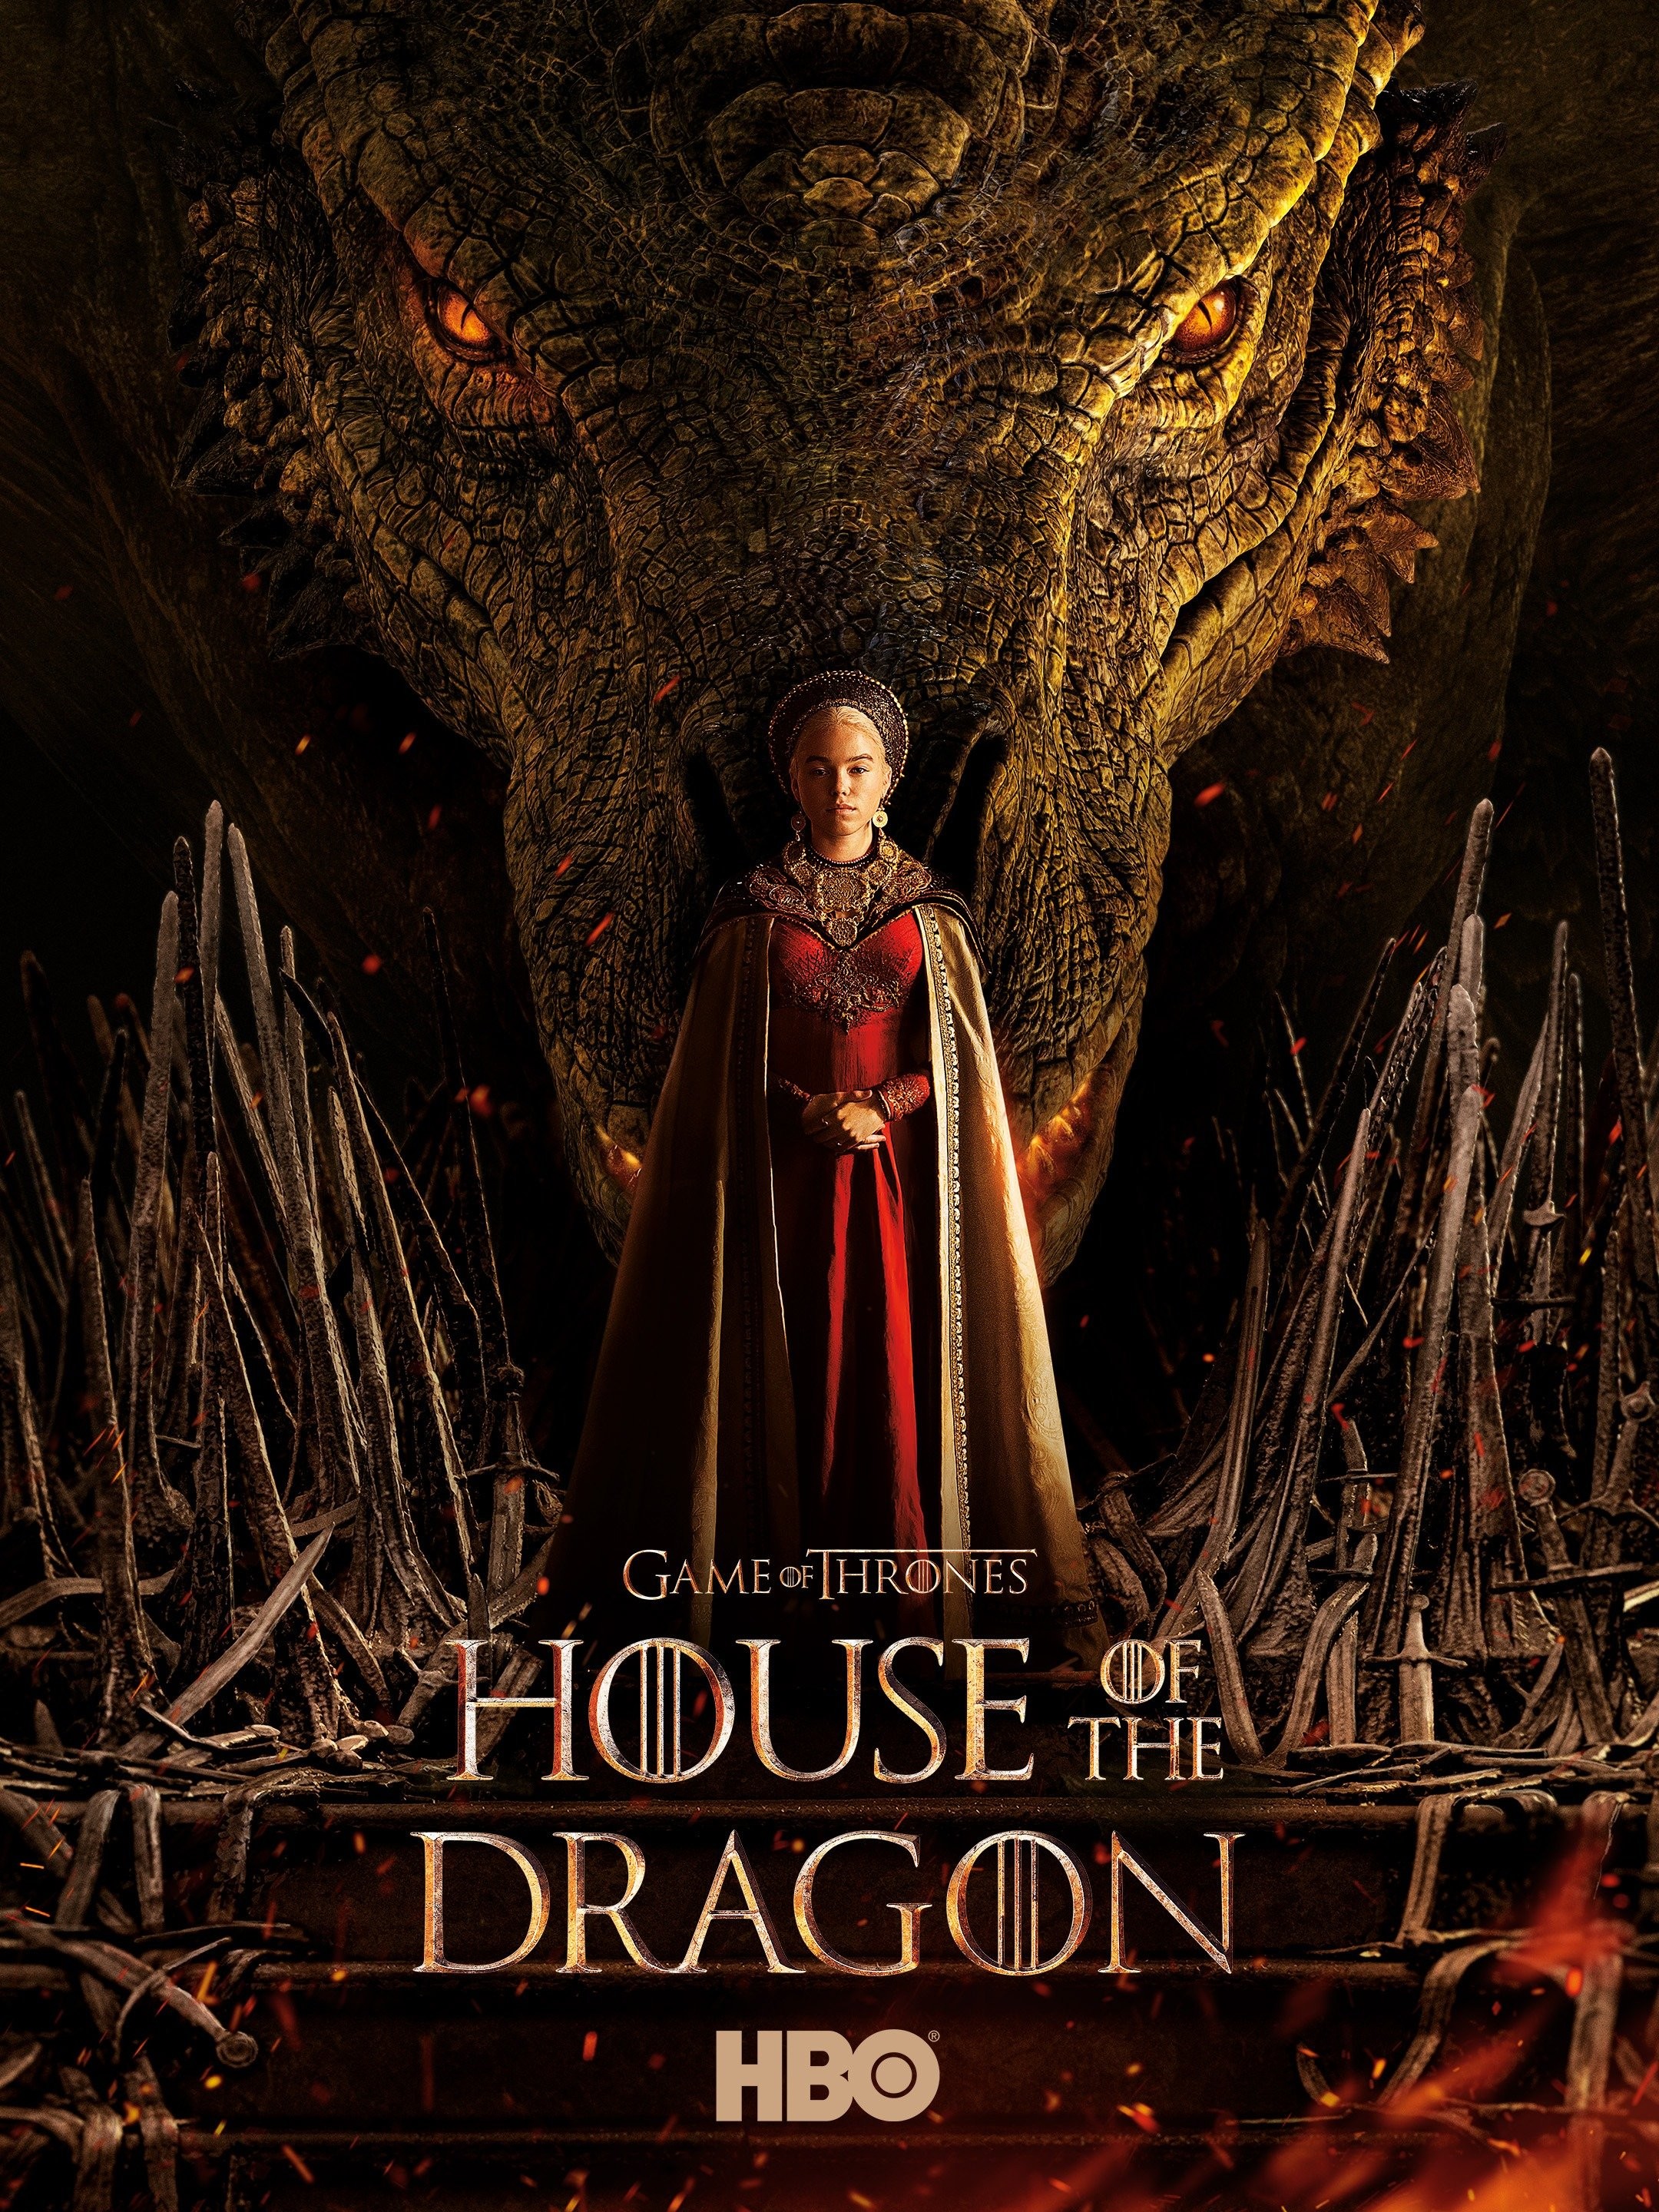 House of the Dragon Episode 1 Review: A well-crafted prequel to